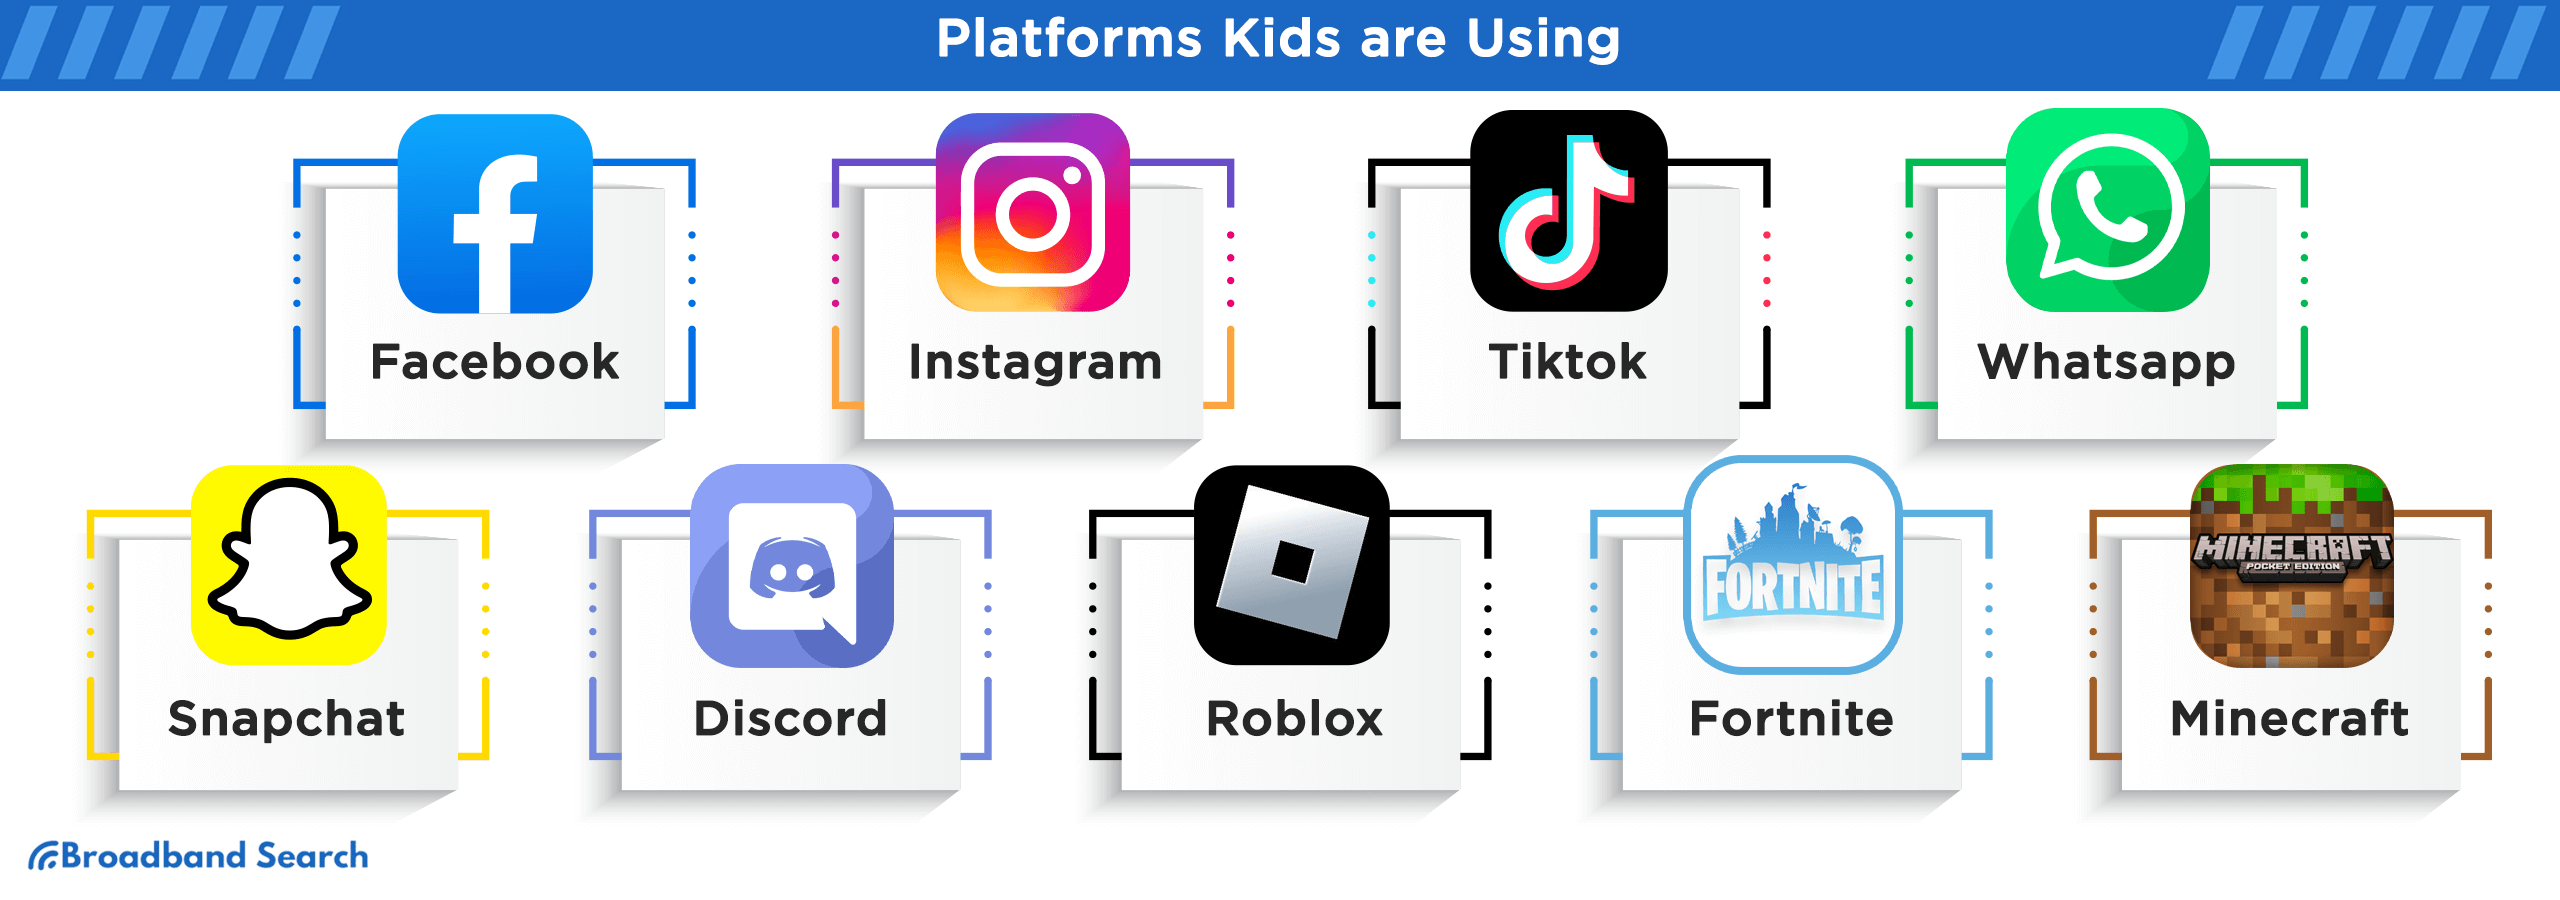 Names of platforms kids are using online